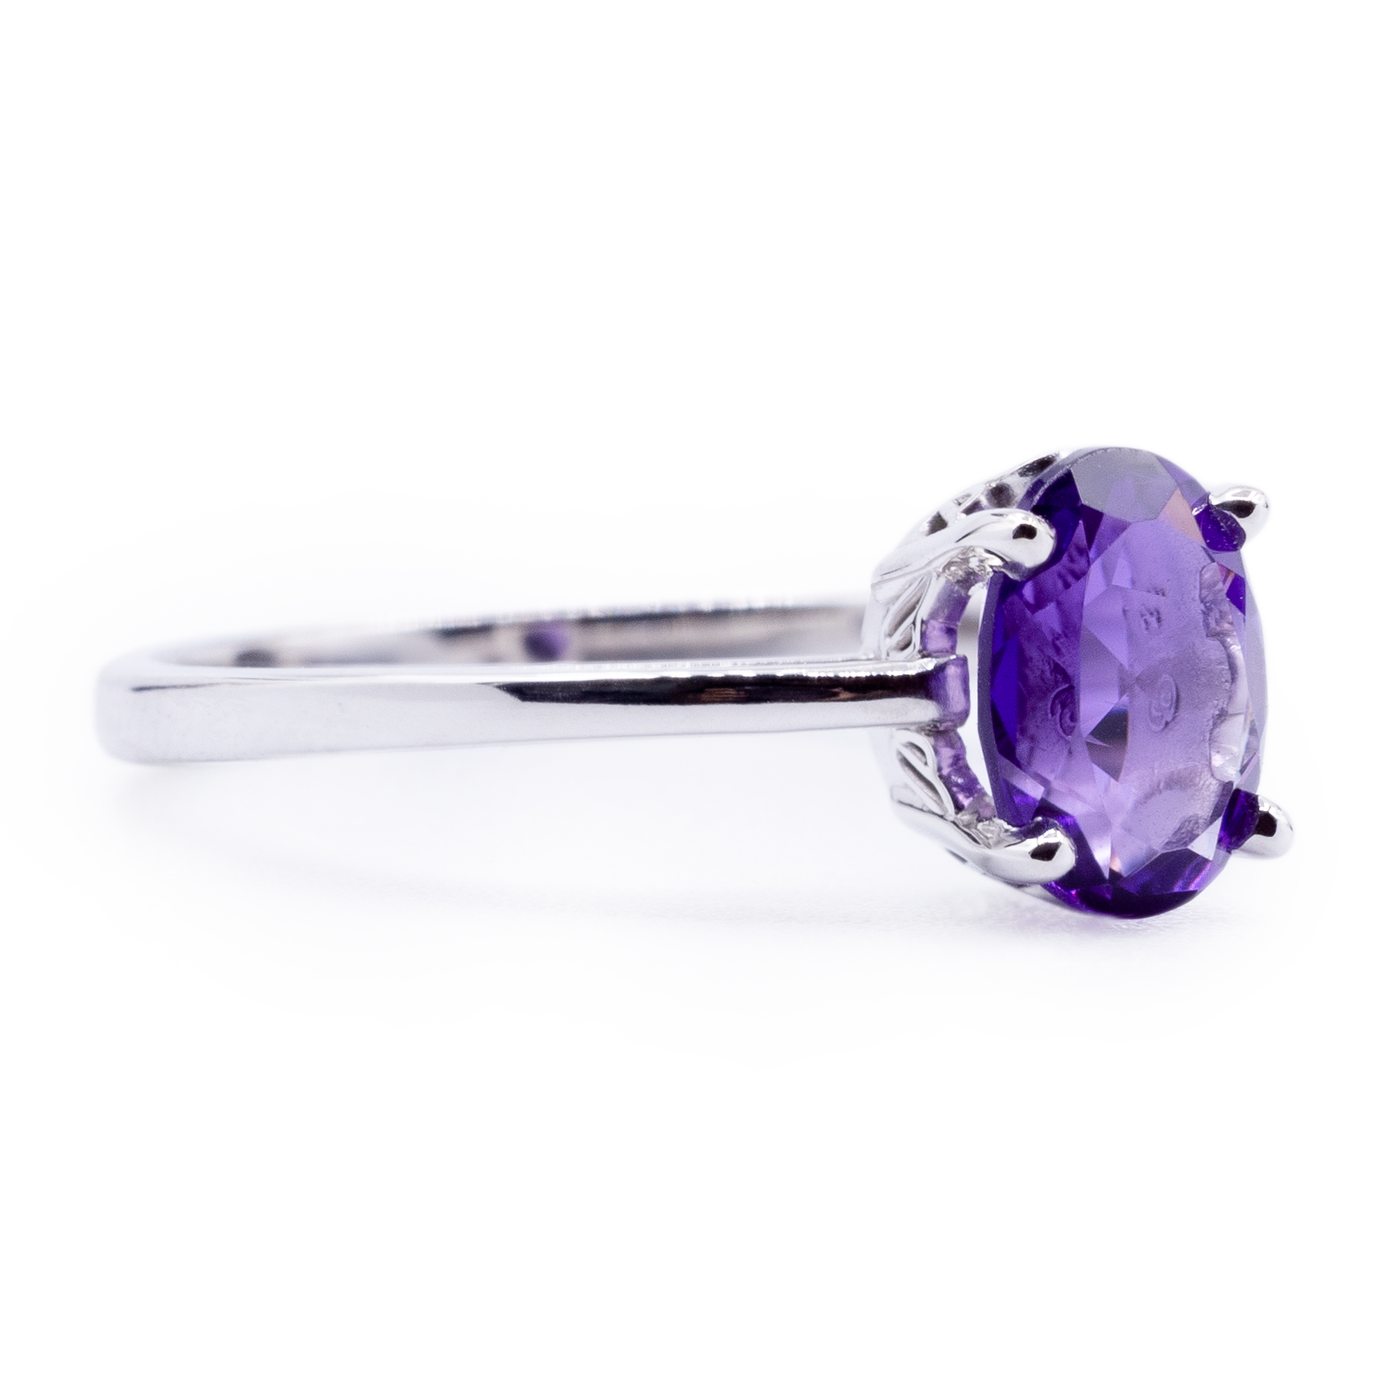 Oval Amethyst Solitaire with Vintage Scroll Detailing Ring